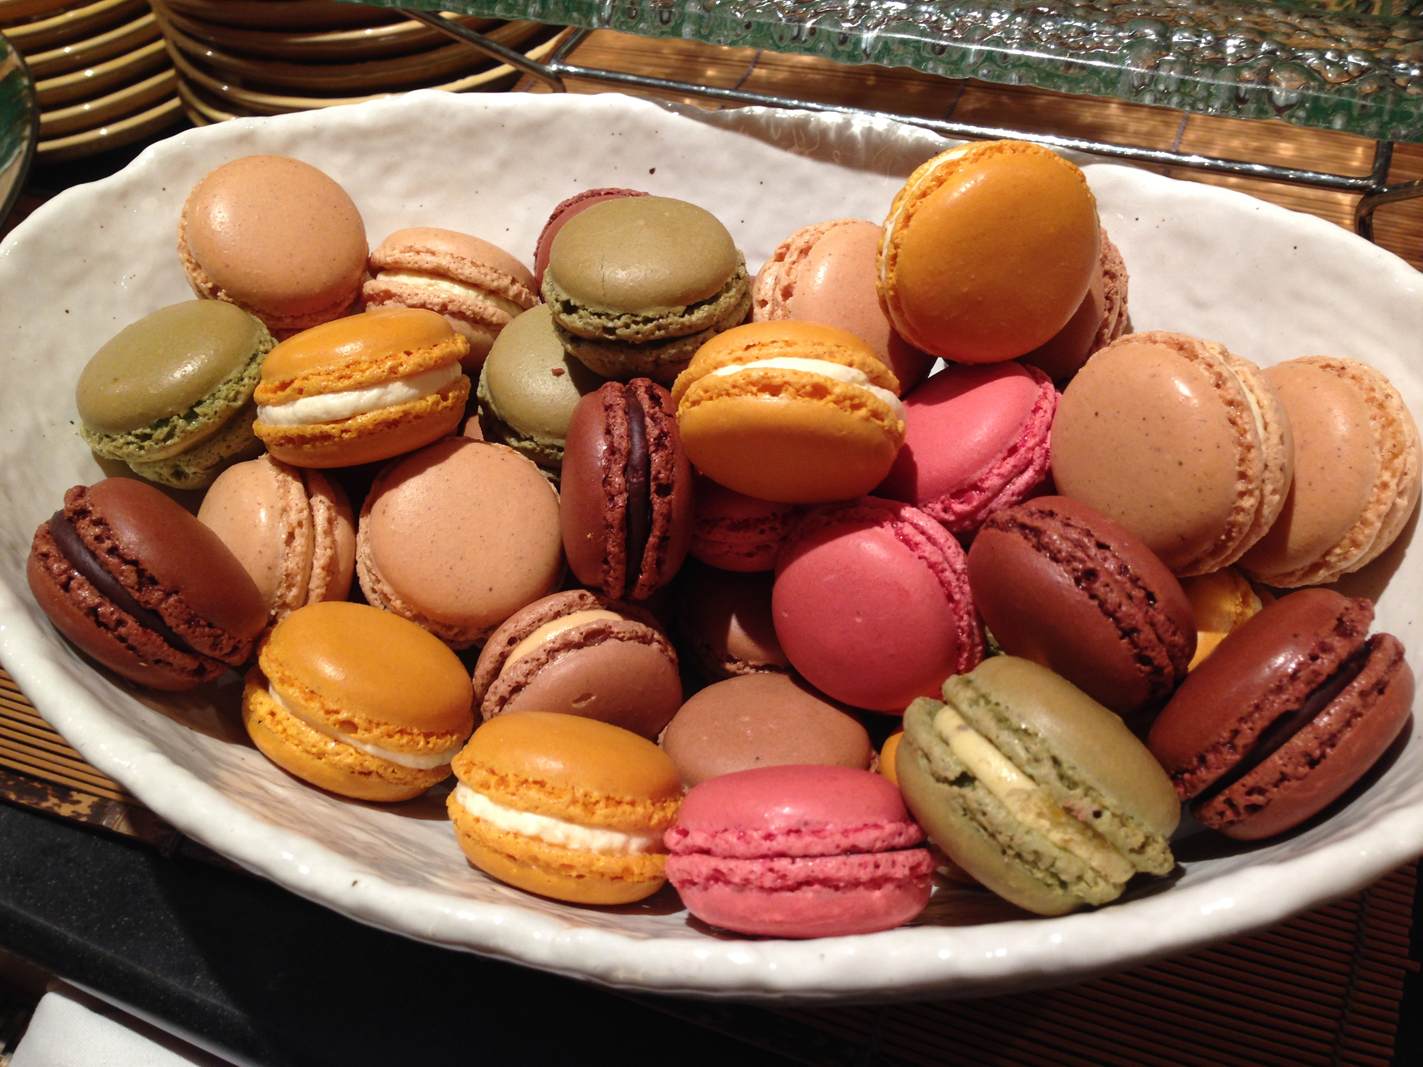 Just had to get a close-up of the macaroons. So colorful!